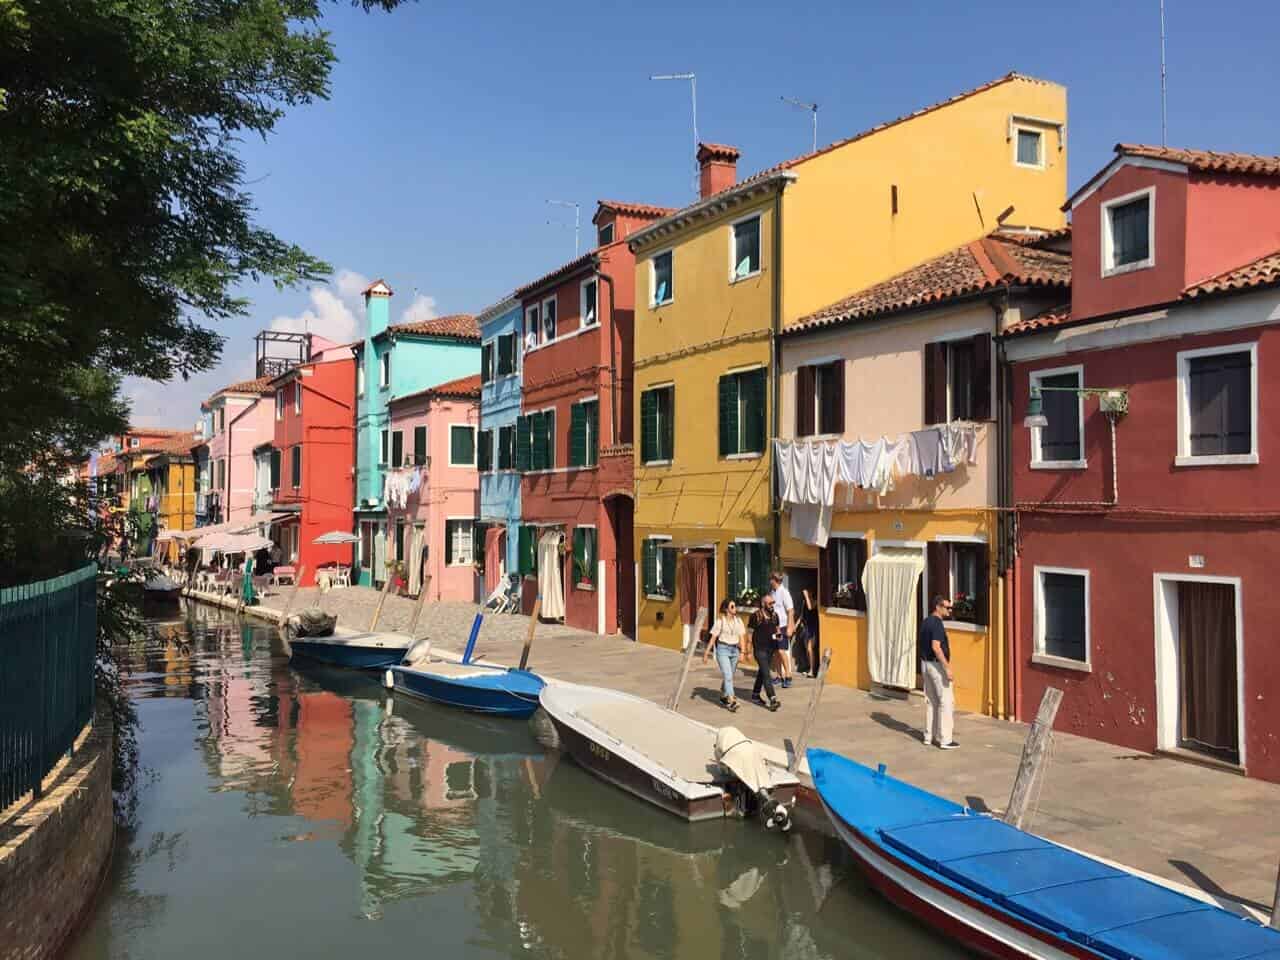 Why Burano should be on your Italy Bucket List